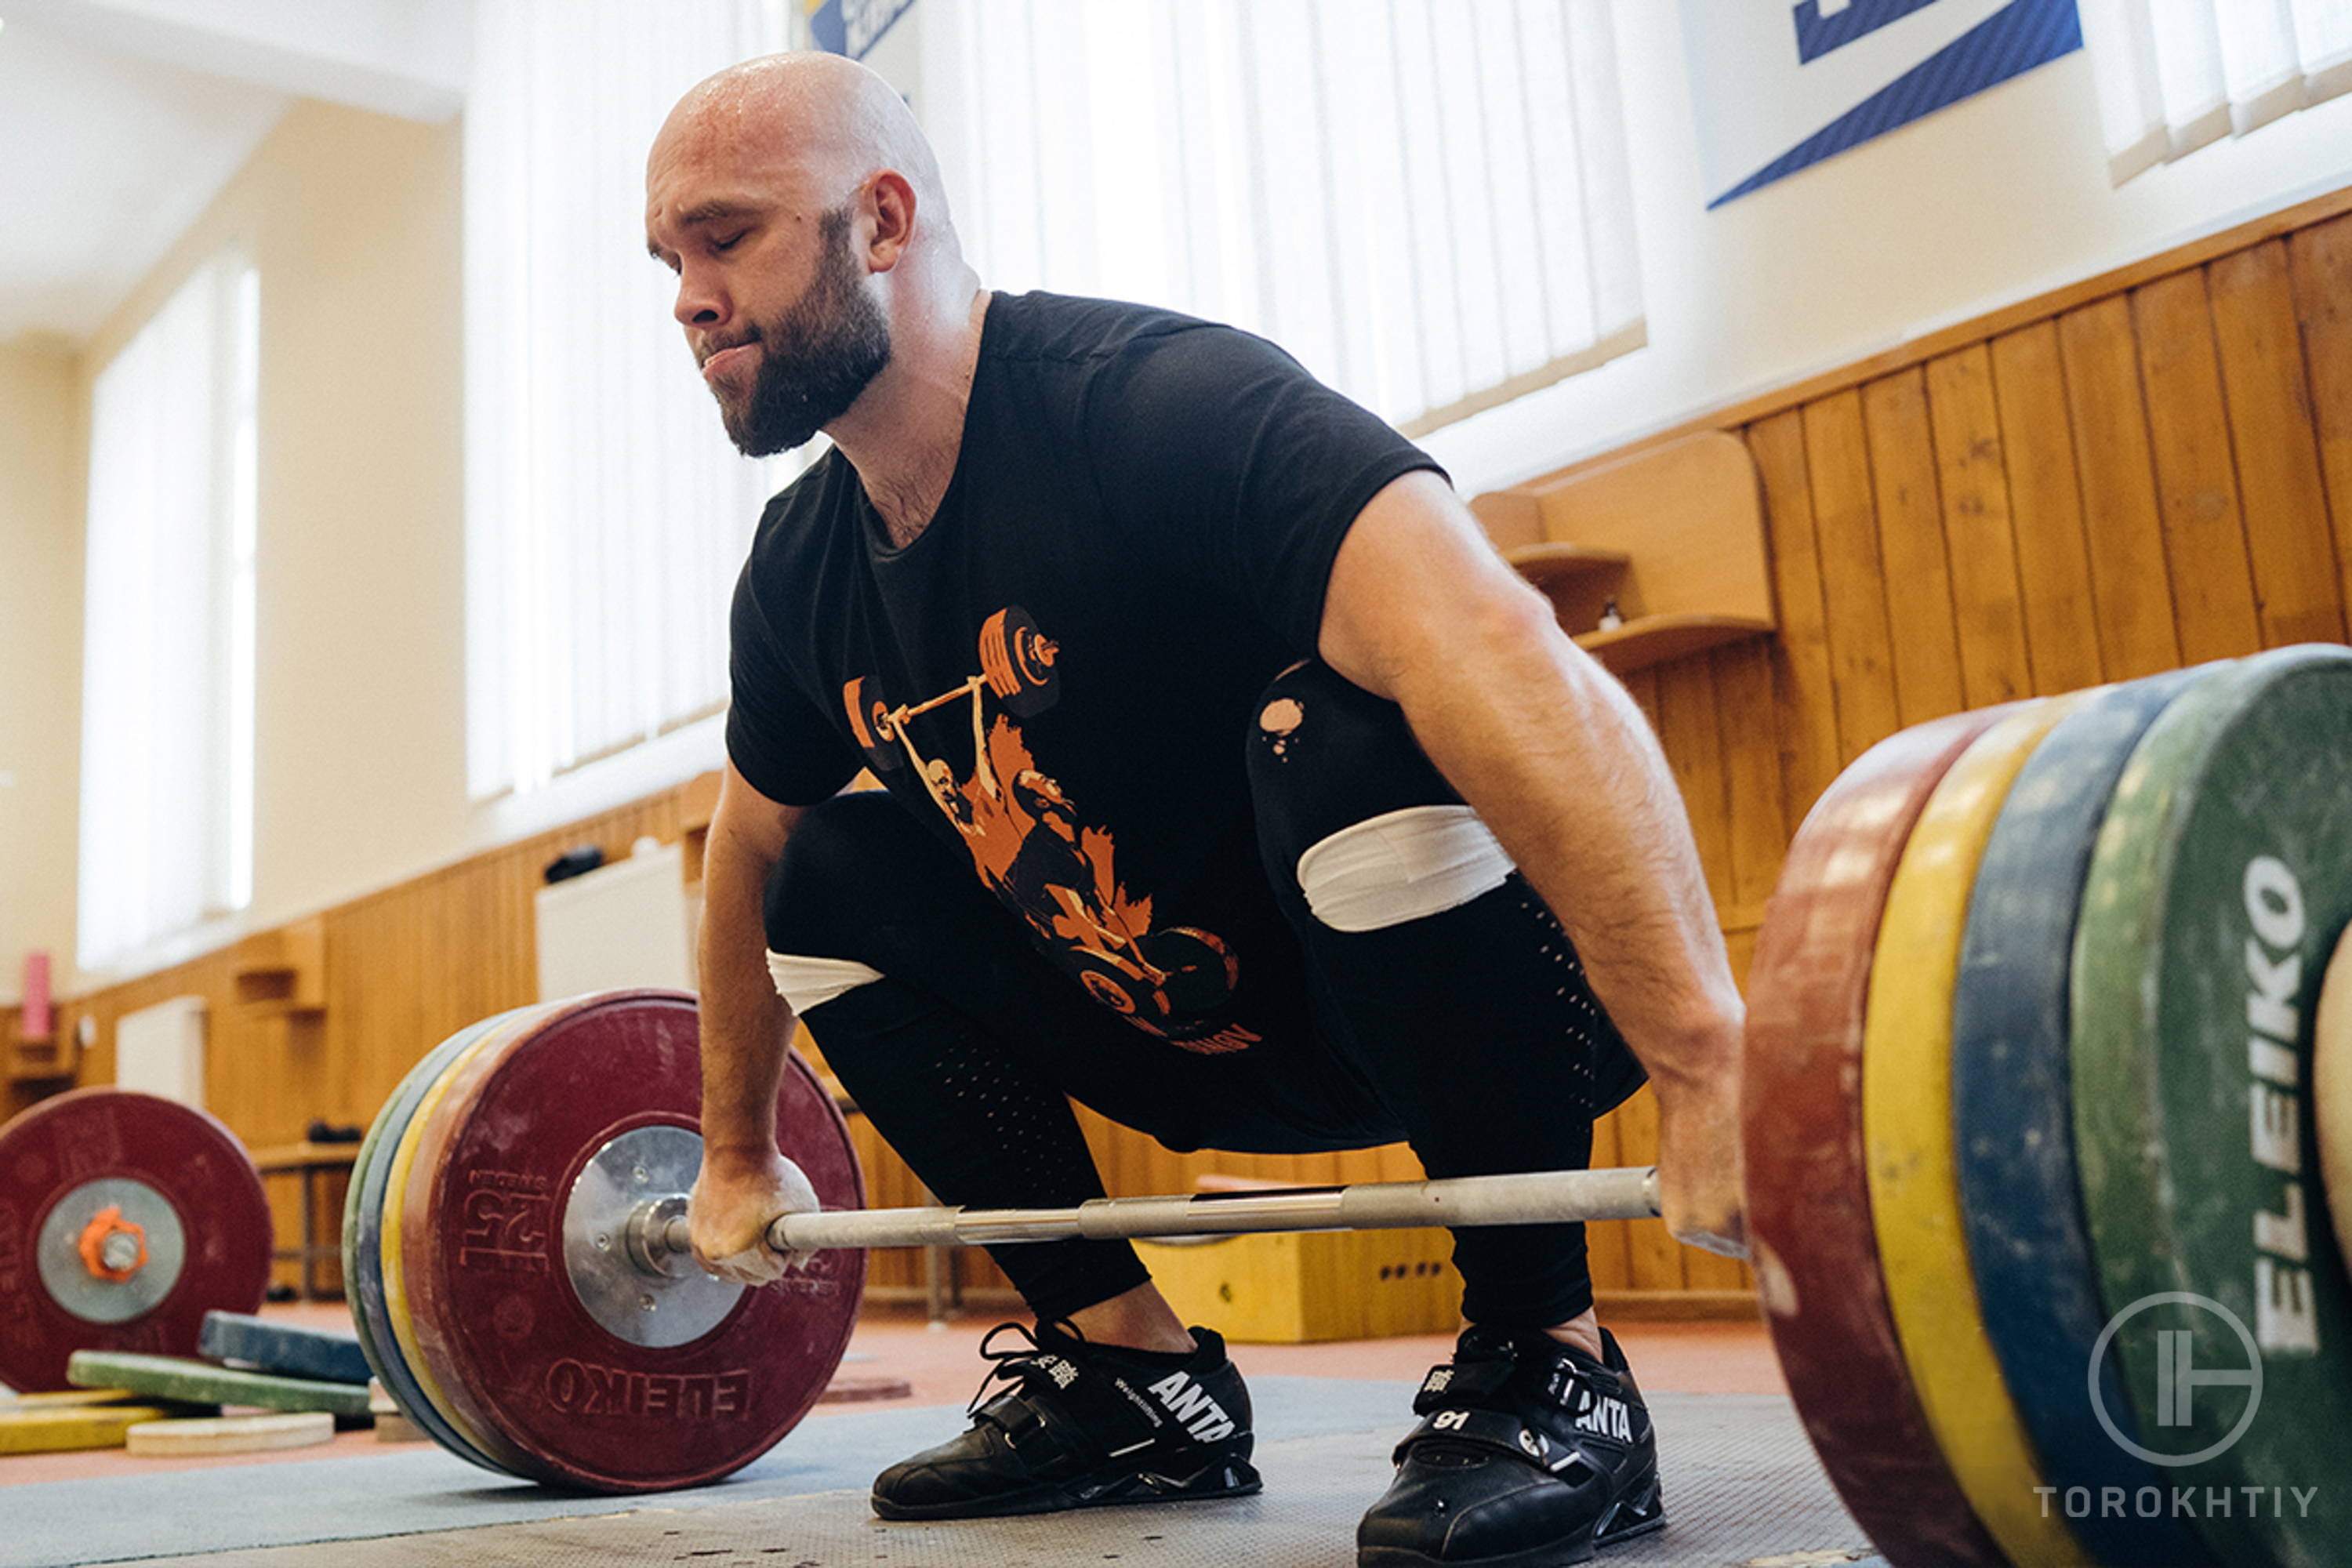 Weightlifting Shoes in Use